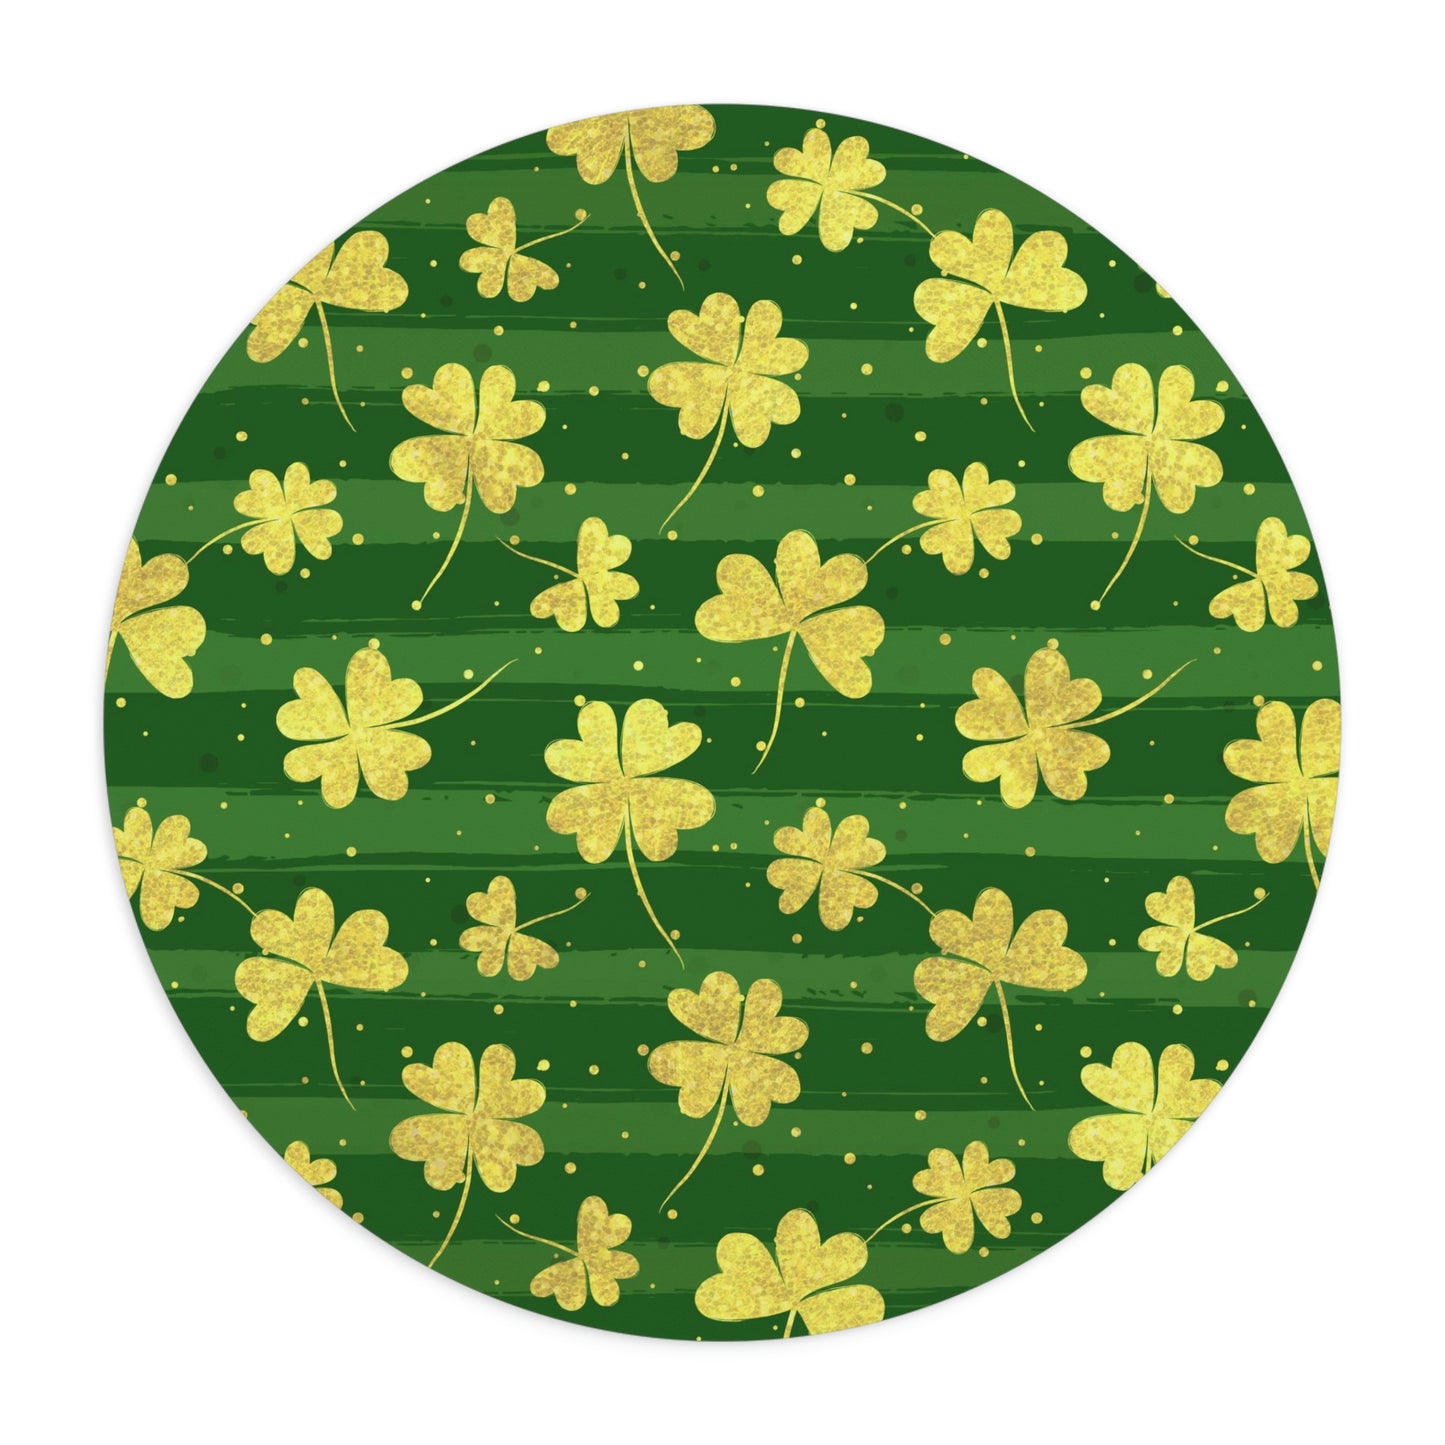 Gold Clovers Mouse Pad